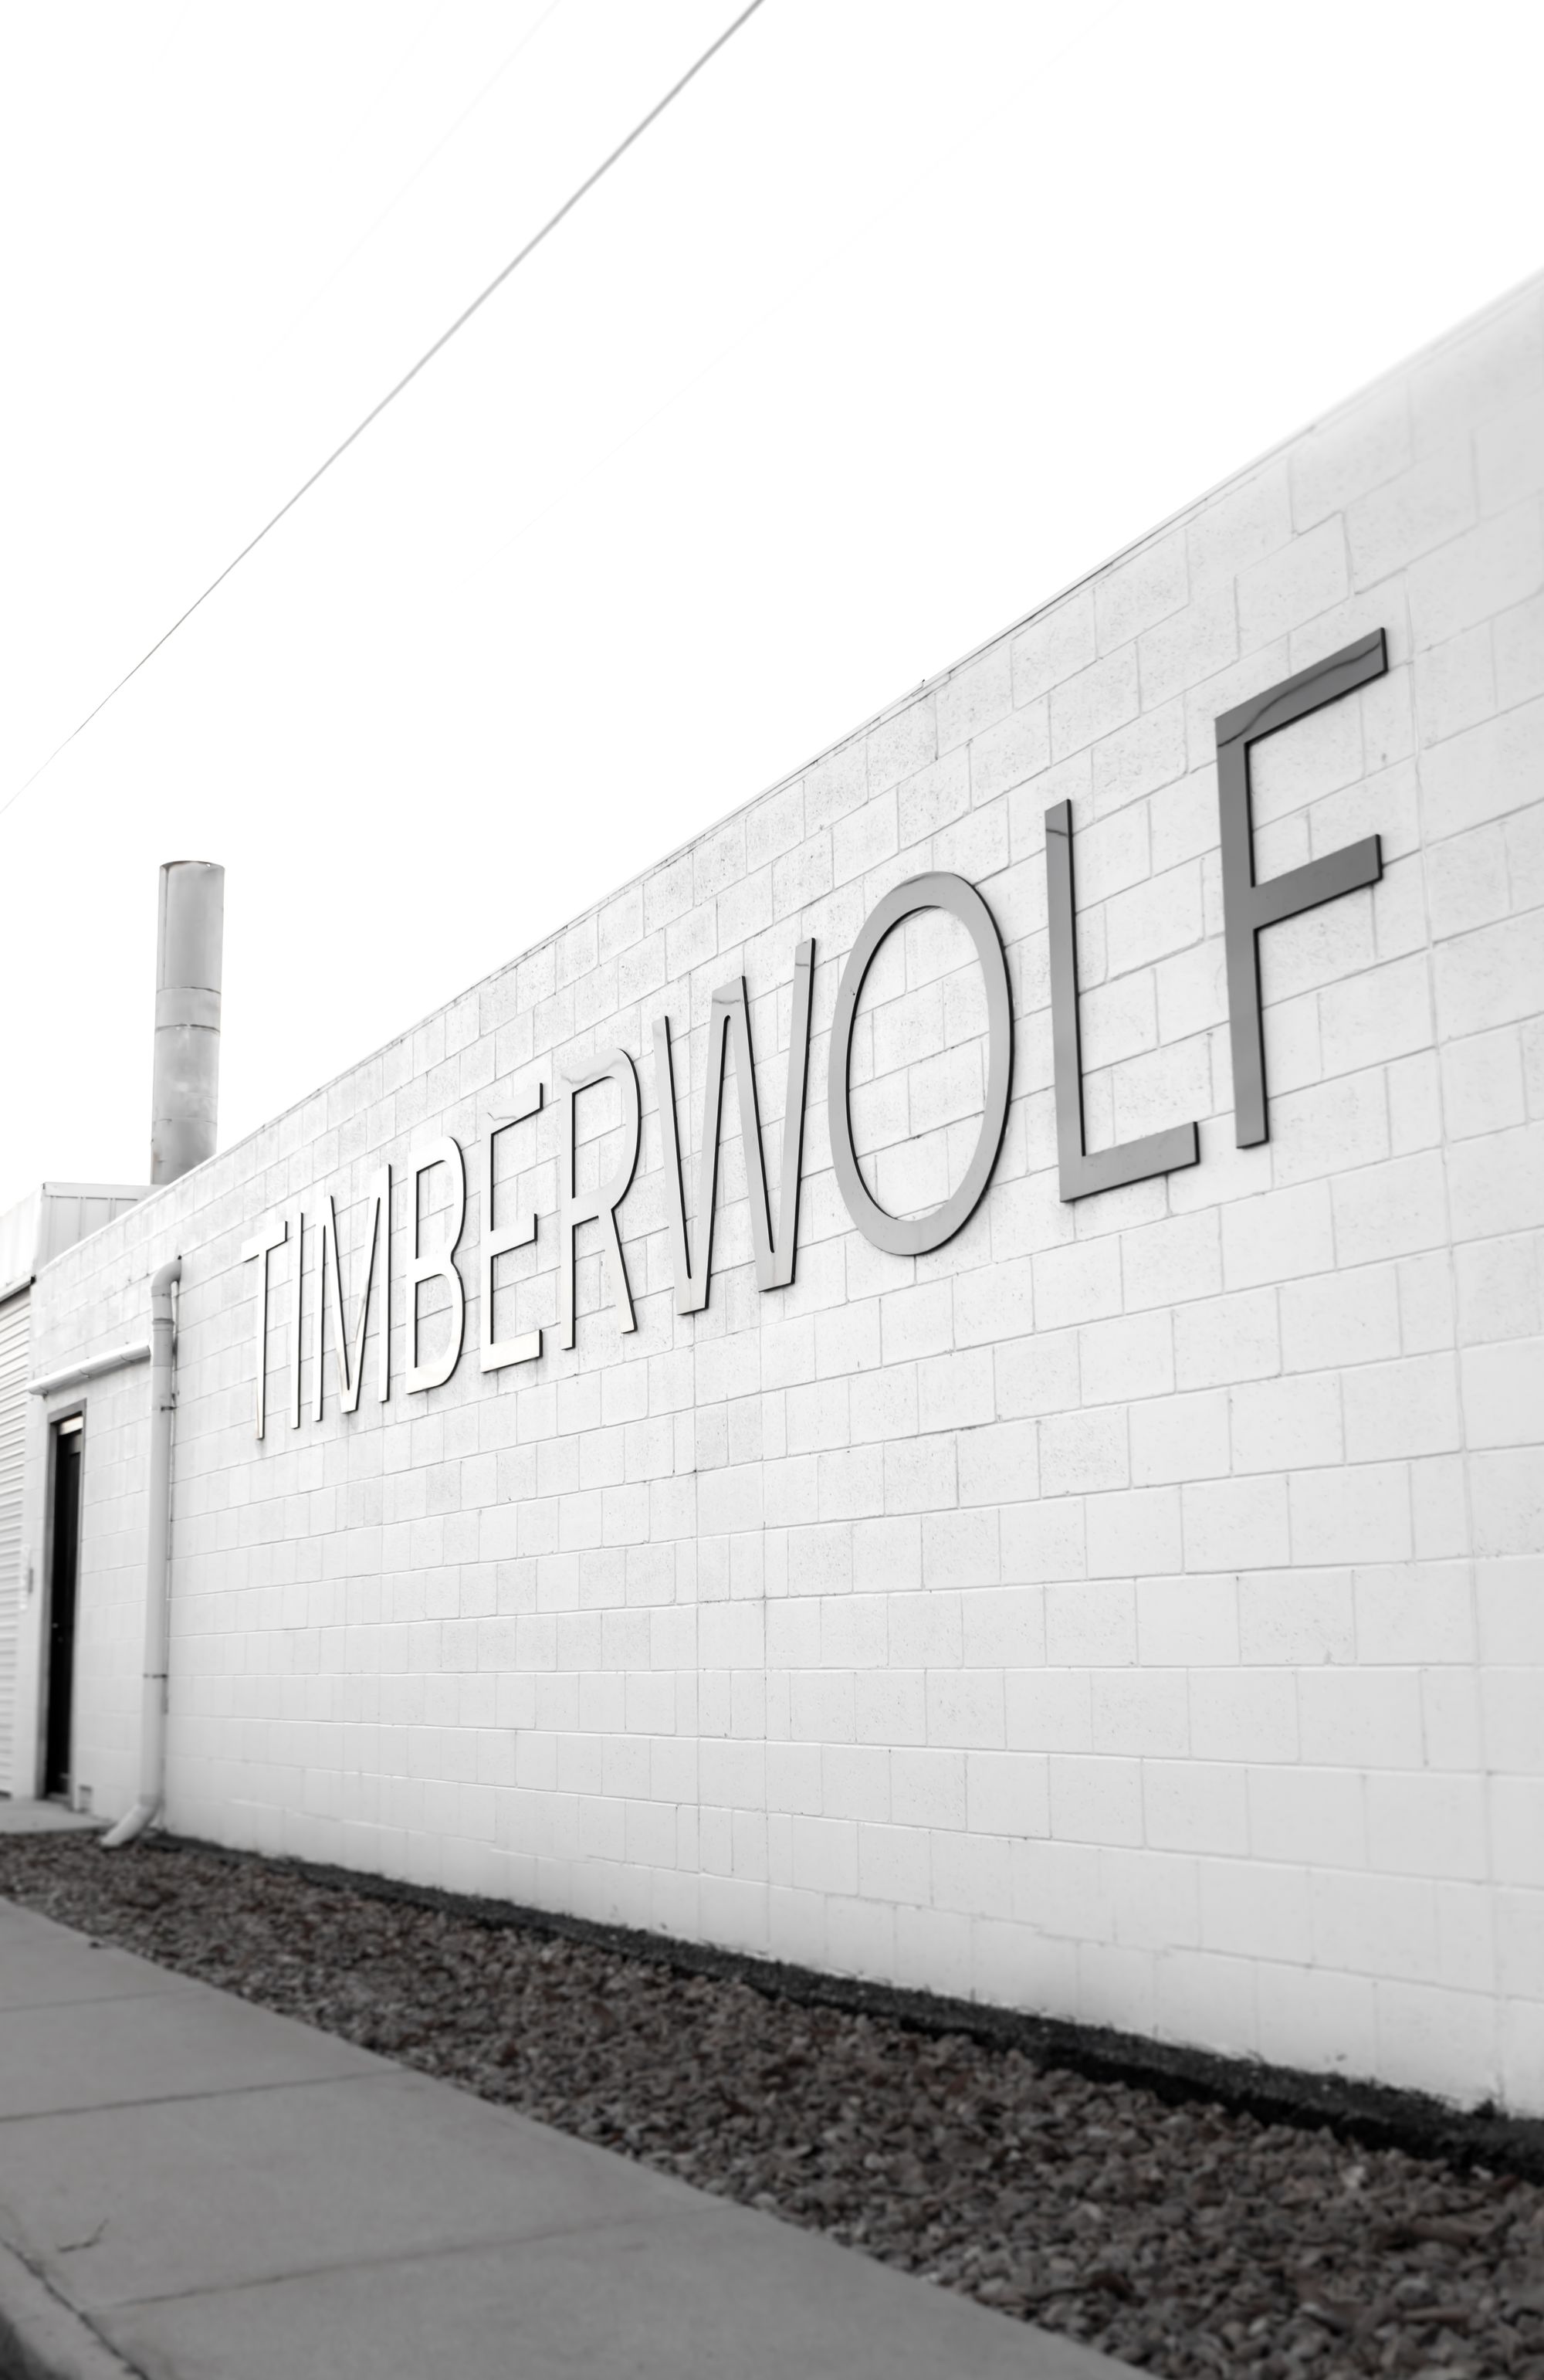 Timberwolf Design Showroom. the exterior of the Timberwolf showroom, with the brand name "TIMBERWOLF" prominently displayed in bold, three-dimensional letters on a white brick wall. The composition of the image, with a clear sky as the backdrop and a focus on the brand signage, suggests a modern and professional business facade. This branding is likely meant to convey a strong and reliable image for the company.